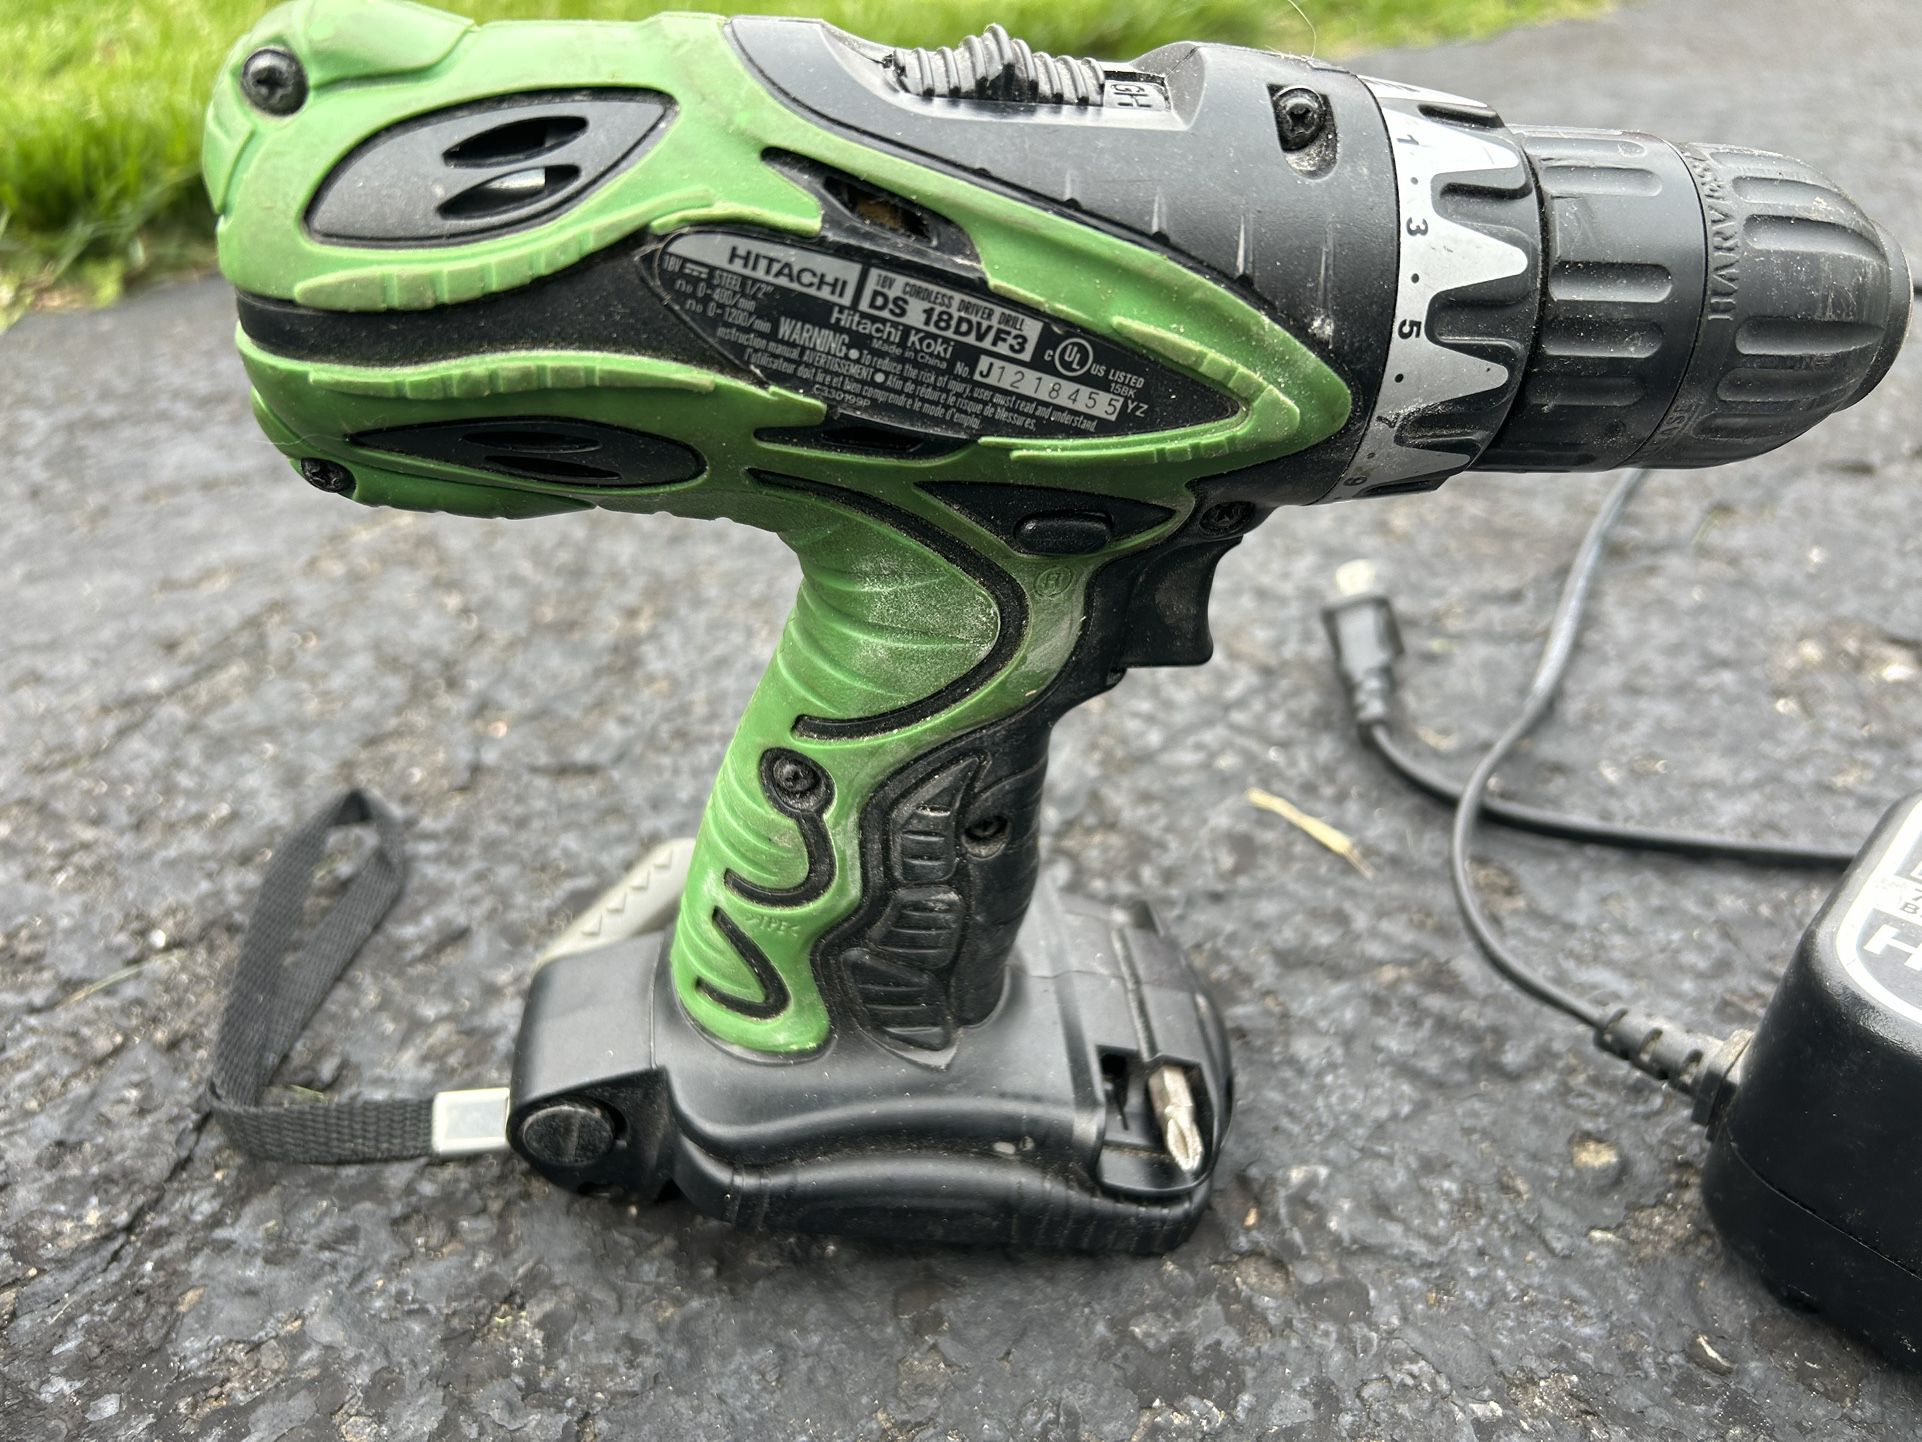 Drill, Flashlight, Battery Operated By Hitachi Battery Charger